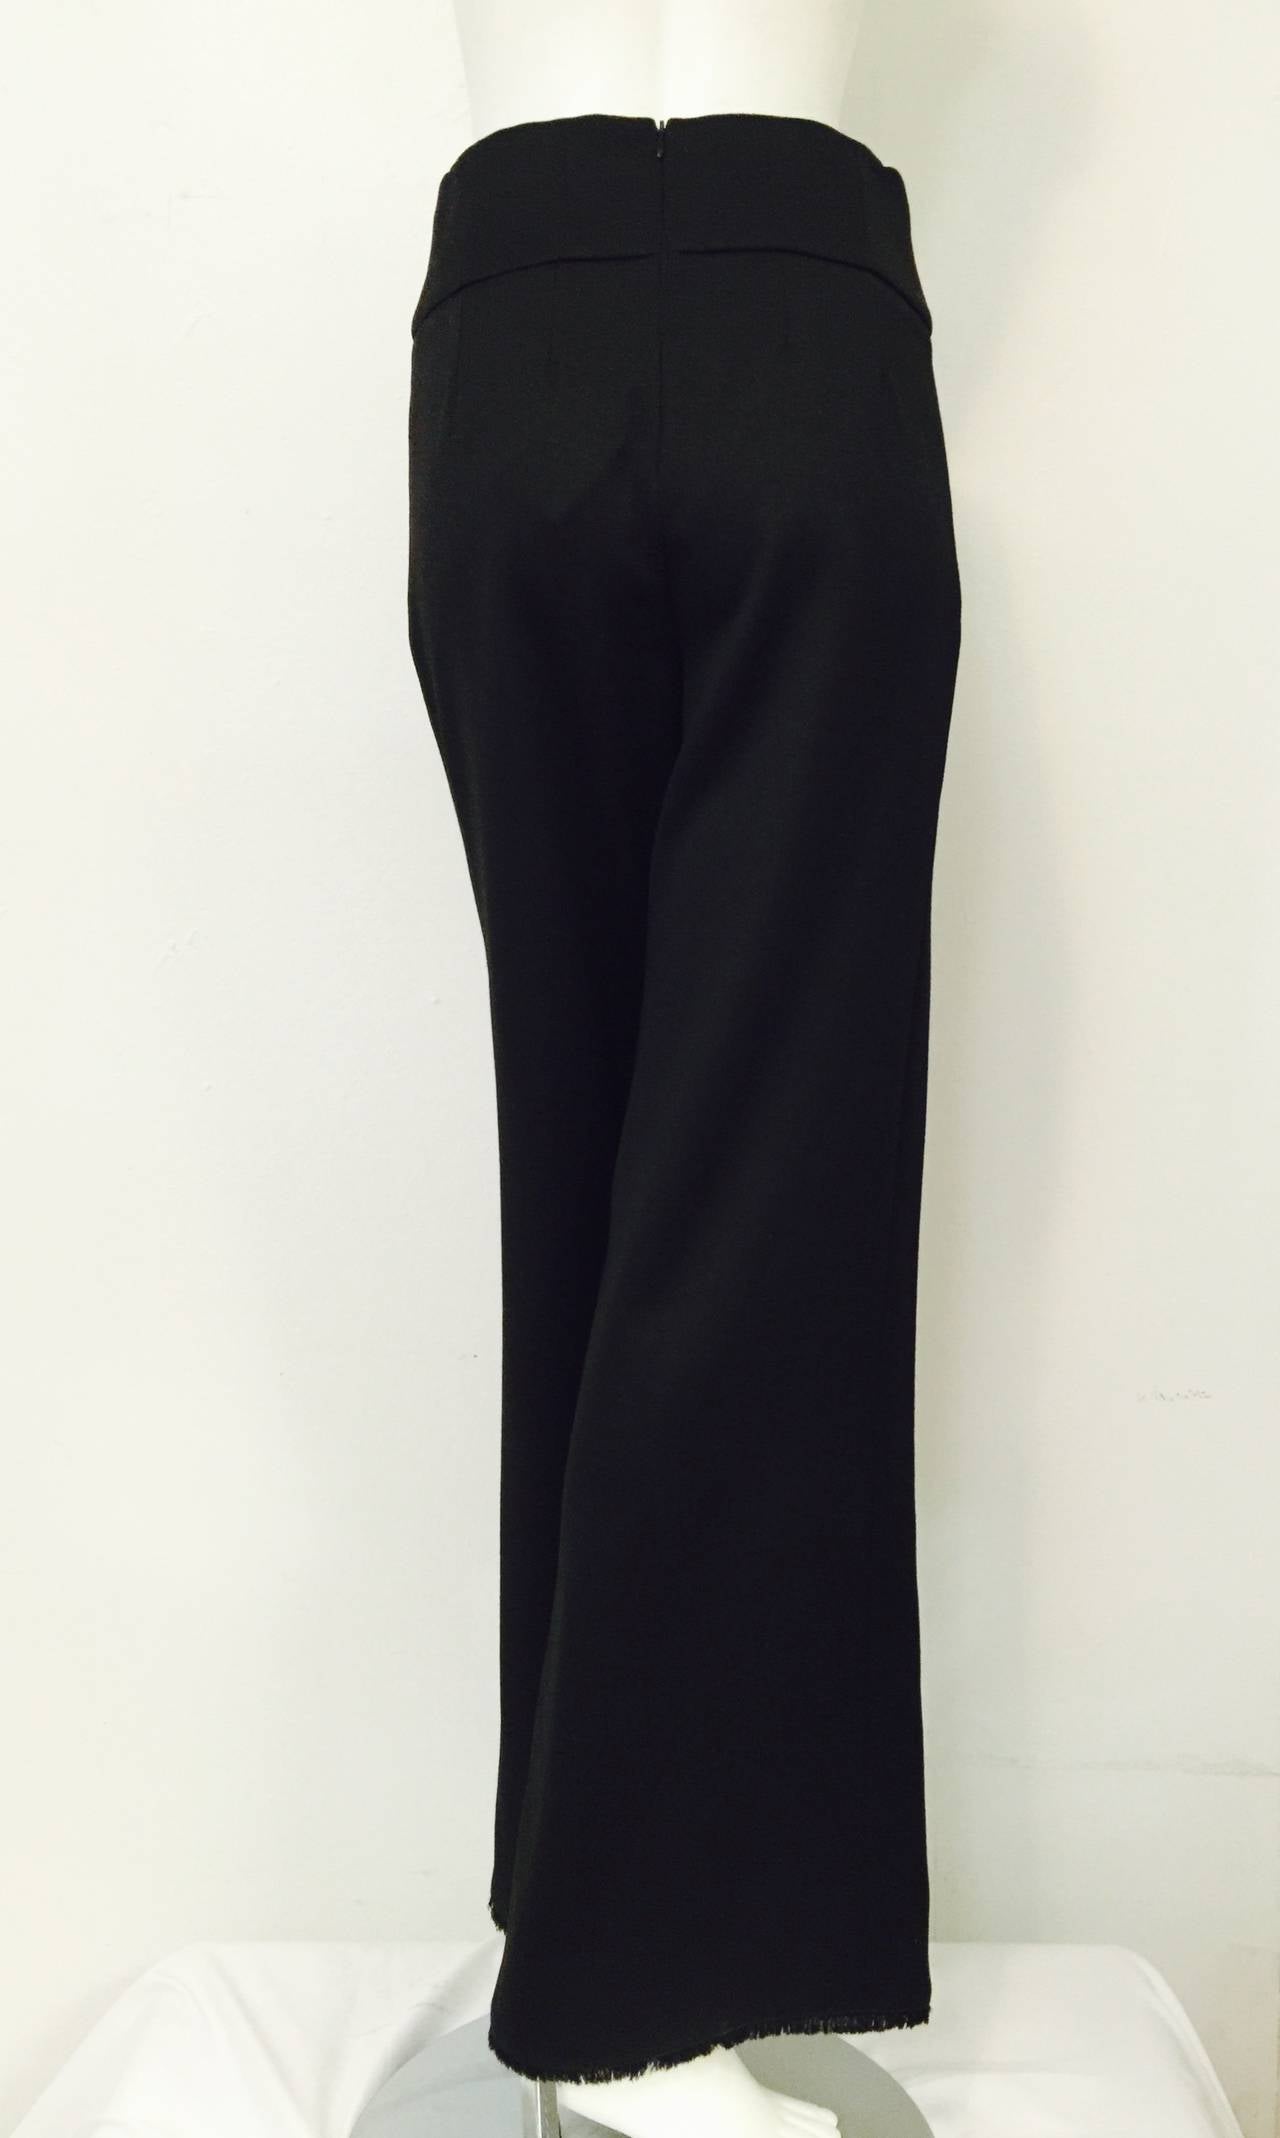 Chanel Fall 2006 Wool Mariner Pant In Excellent Condition For Sale In Palm Beach, FL